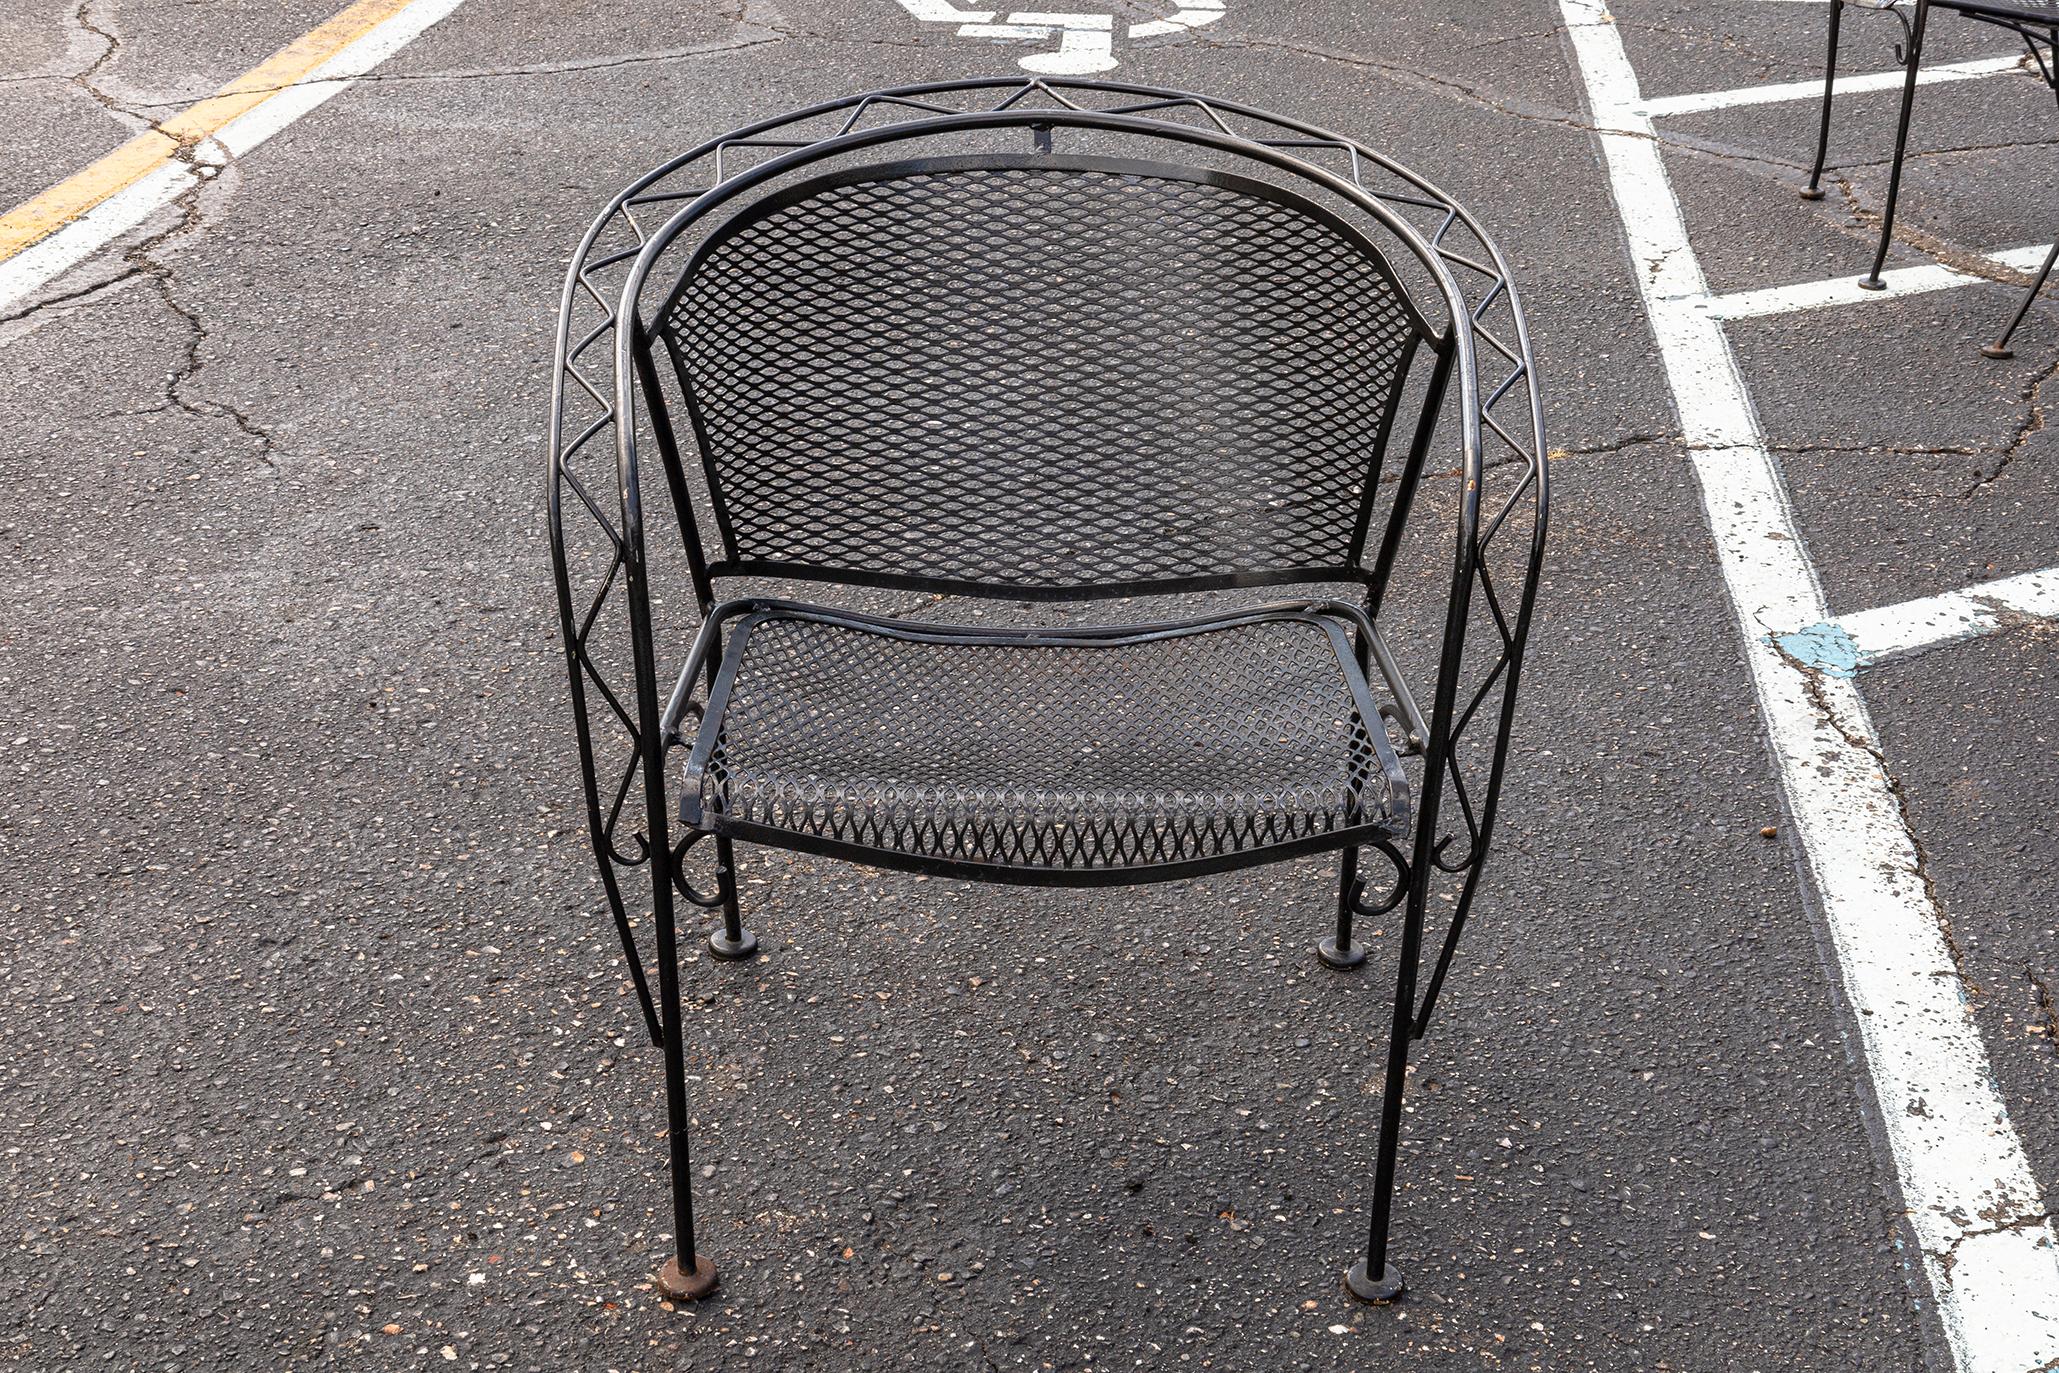 A Russell Woodard wrought iron patio set with table and 4 chairs. A fantastic vintage circa 1940s patio set from Woodard Furniture. This whole set features wrought iron construction, black coloring, and high quality design. This whole set is in very